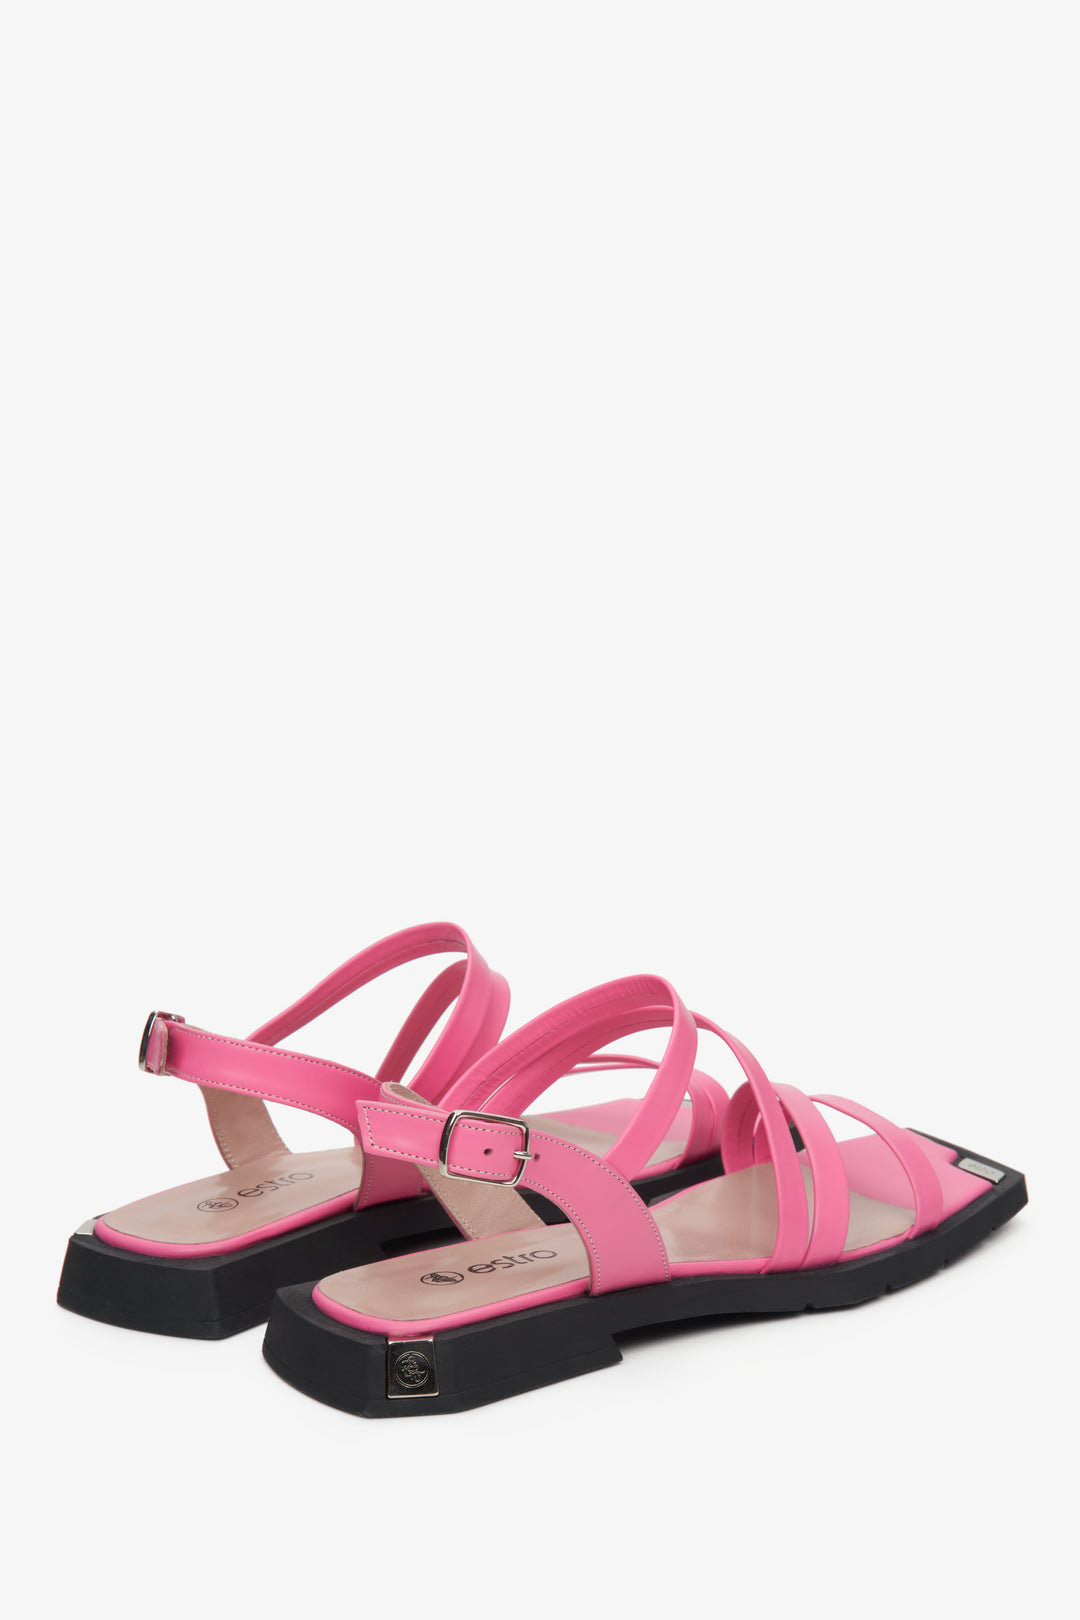 Leather, women's pink sandals by Estro with thin straps - presentation of the back part of the shoes.